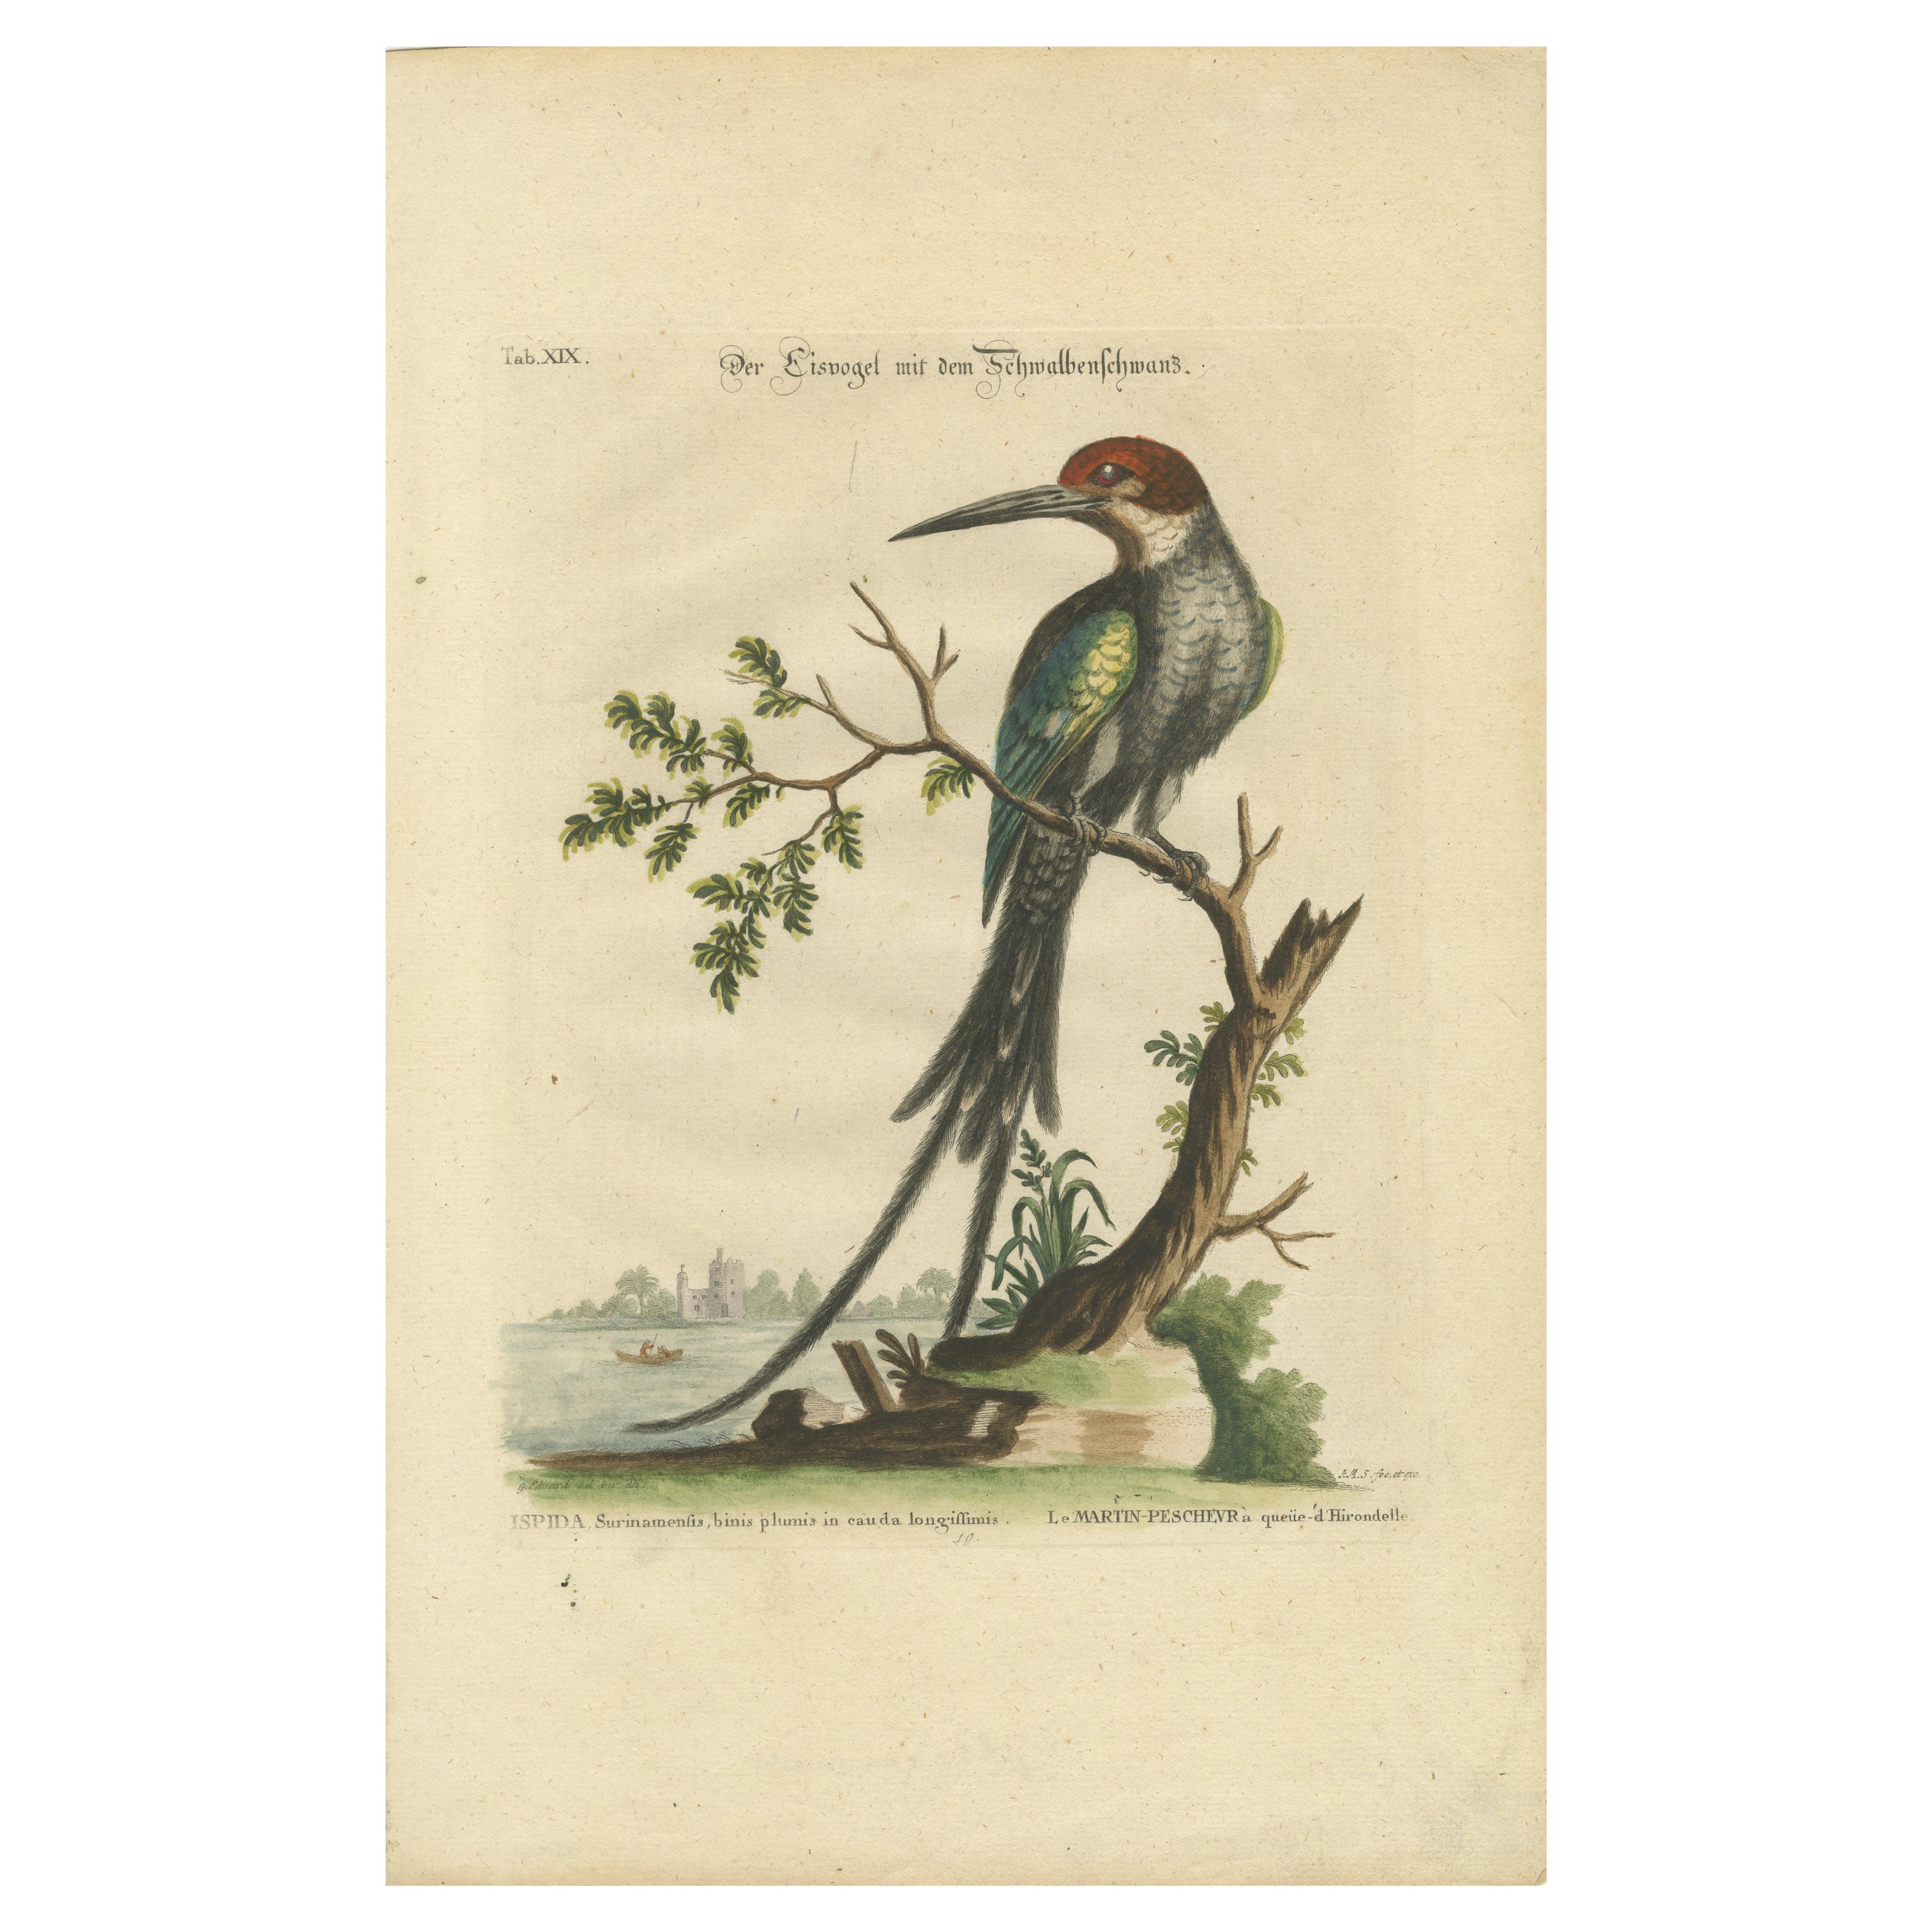 The Surinamese Kingfisher Bird with the Swallow Tail Engraved in 1749